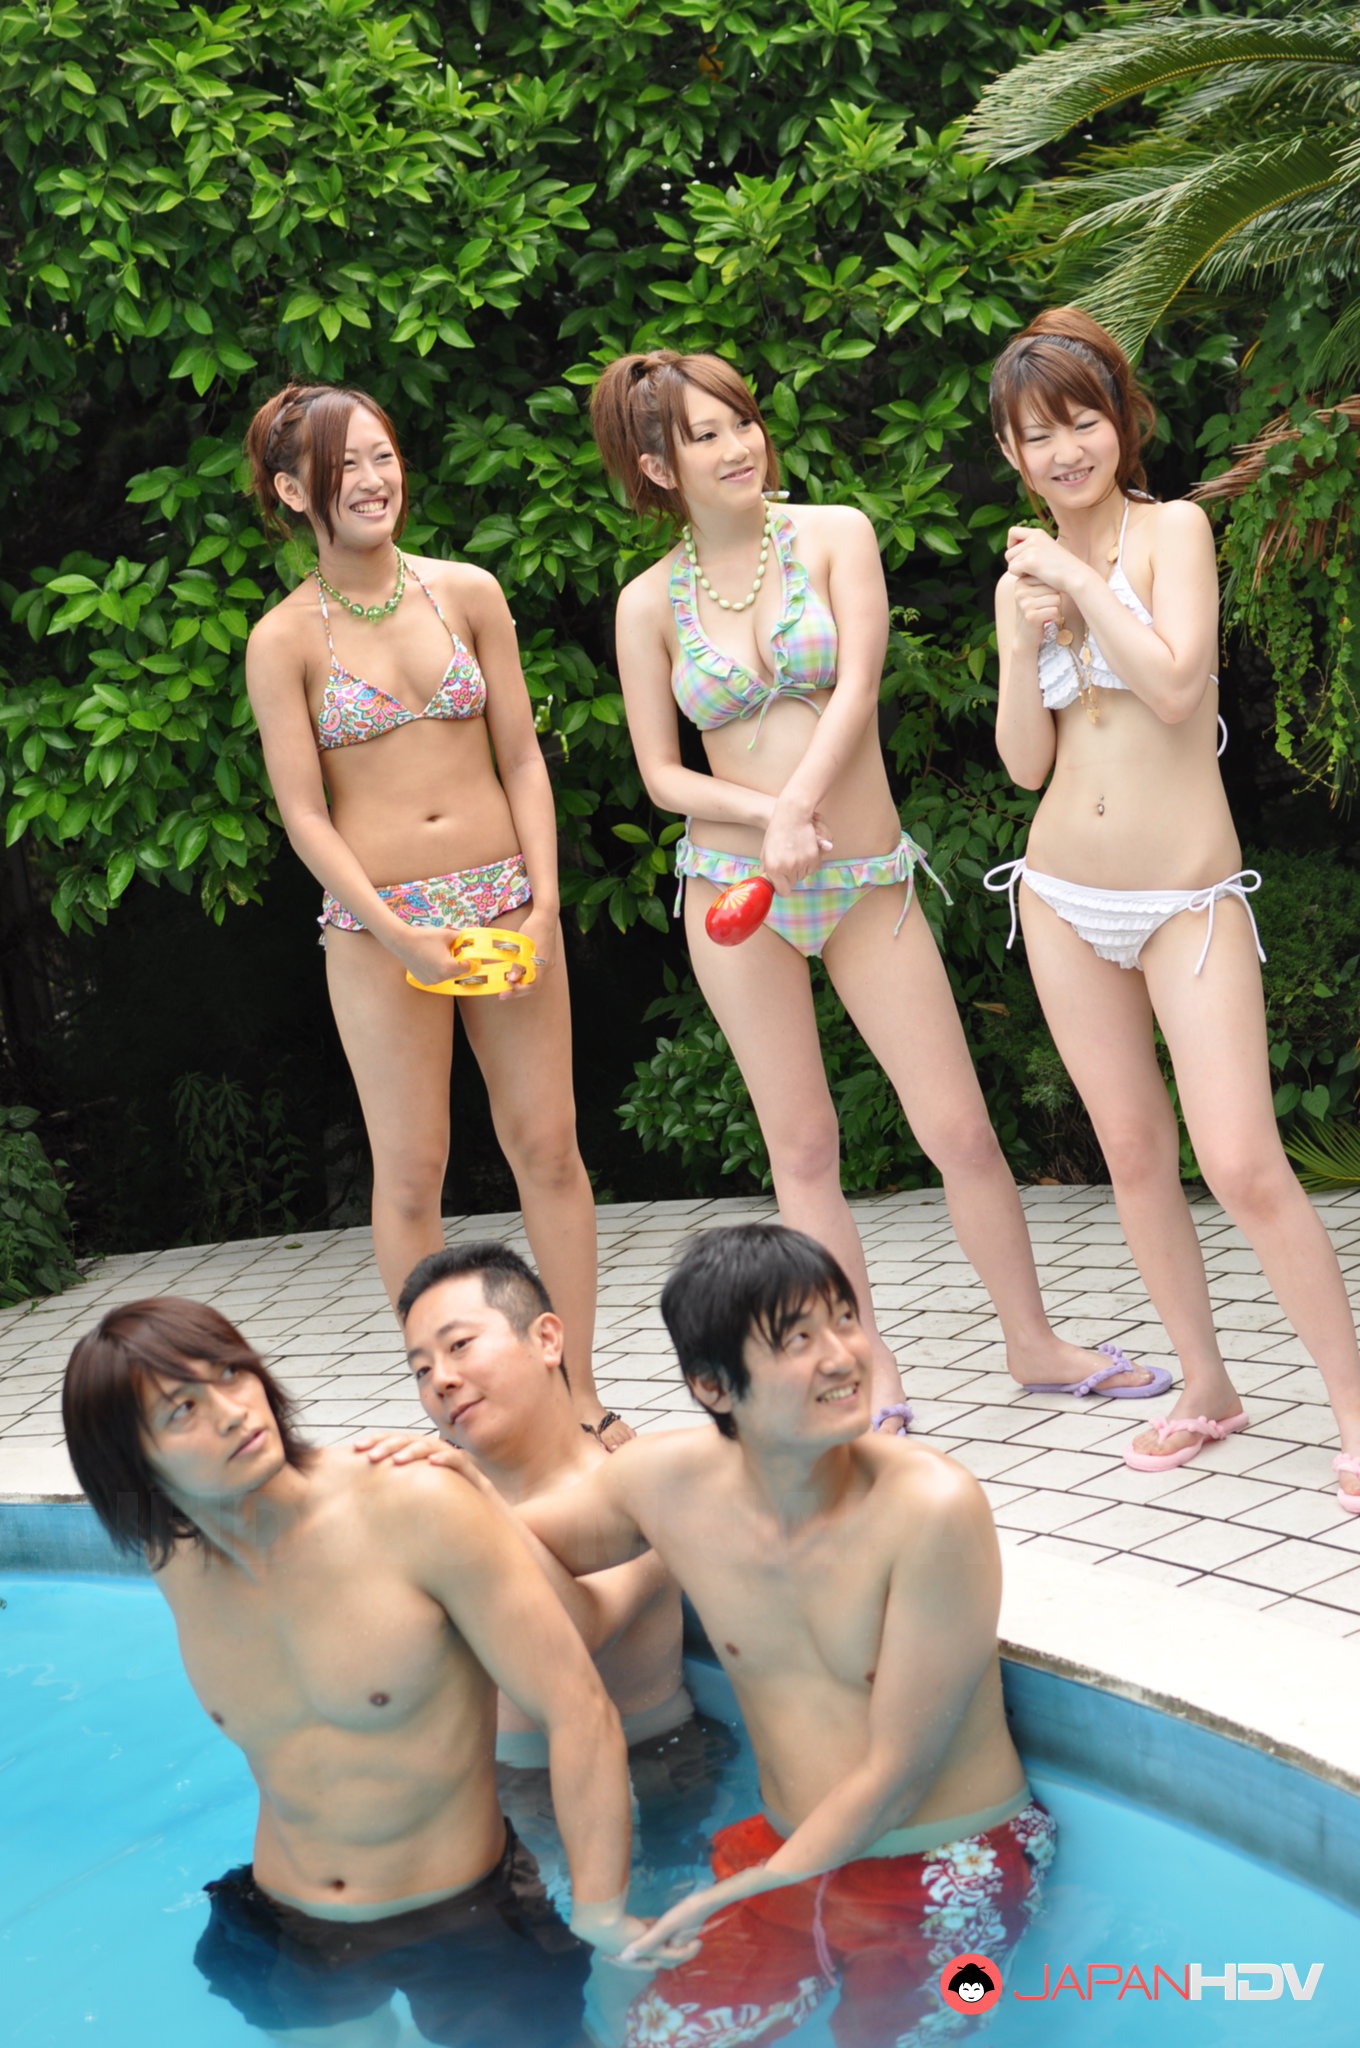 Japanese Pool Porn - Japanese girls enjoy in some sexy pool party